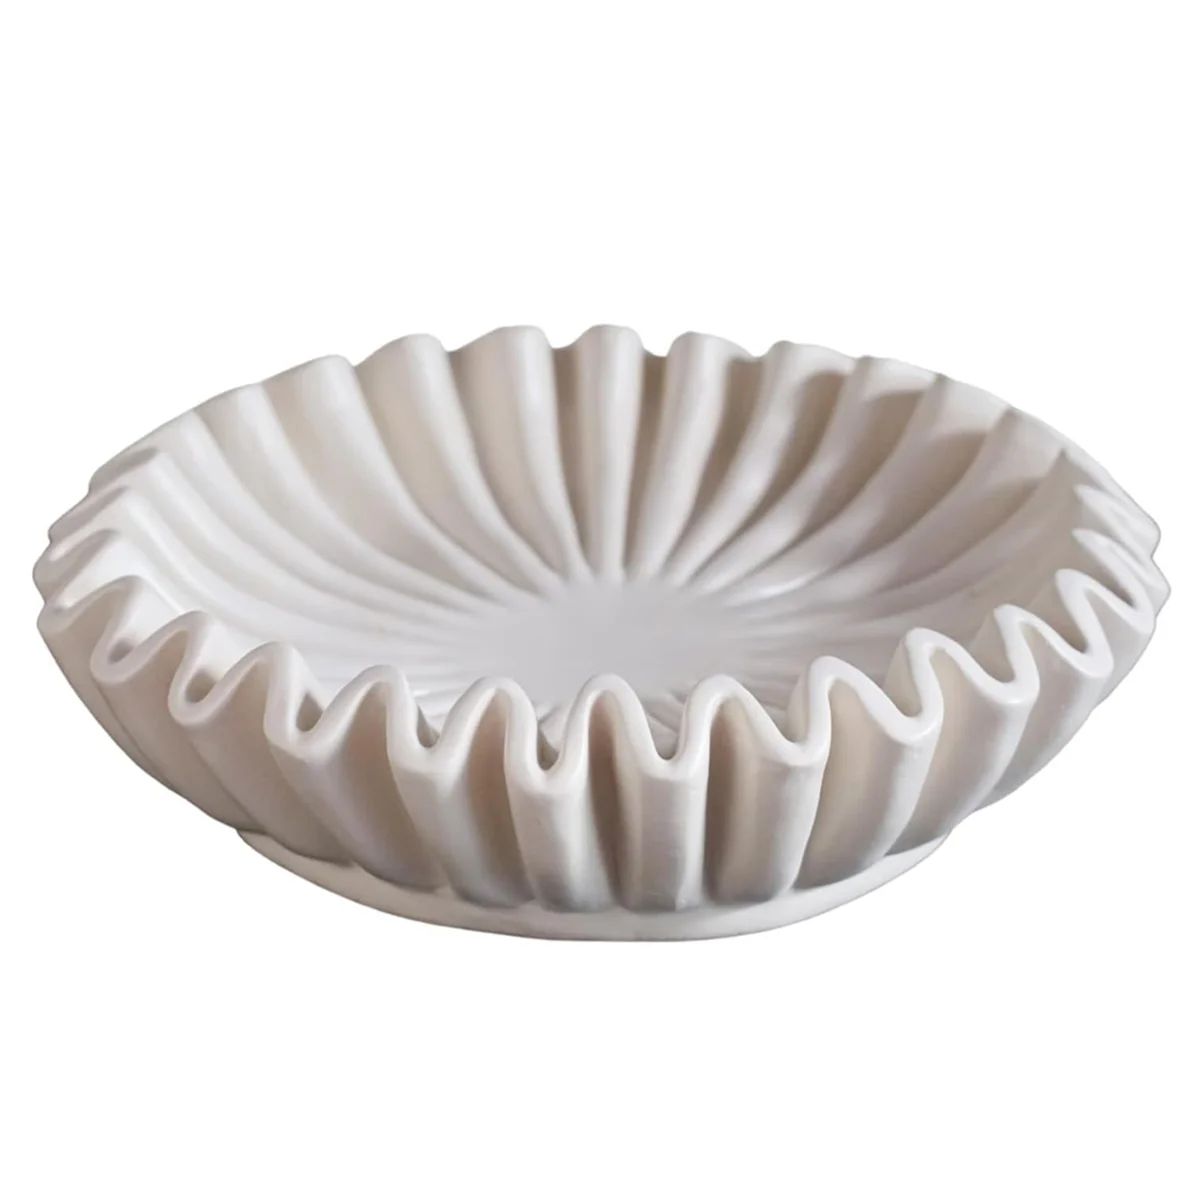 Fluted Ruffle Decorative Bowl - Home Decor Accents for Living Room Styling Coffee Table Bookshelf... | Walmart (US)